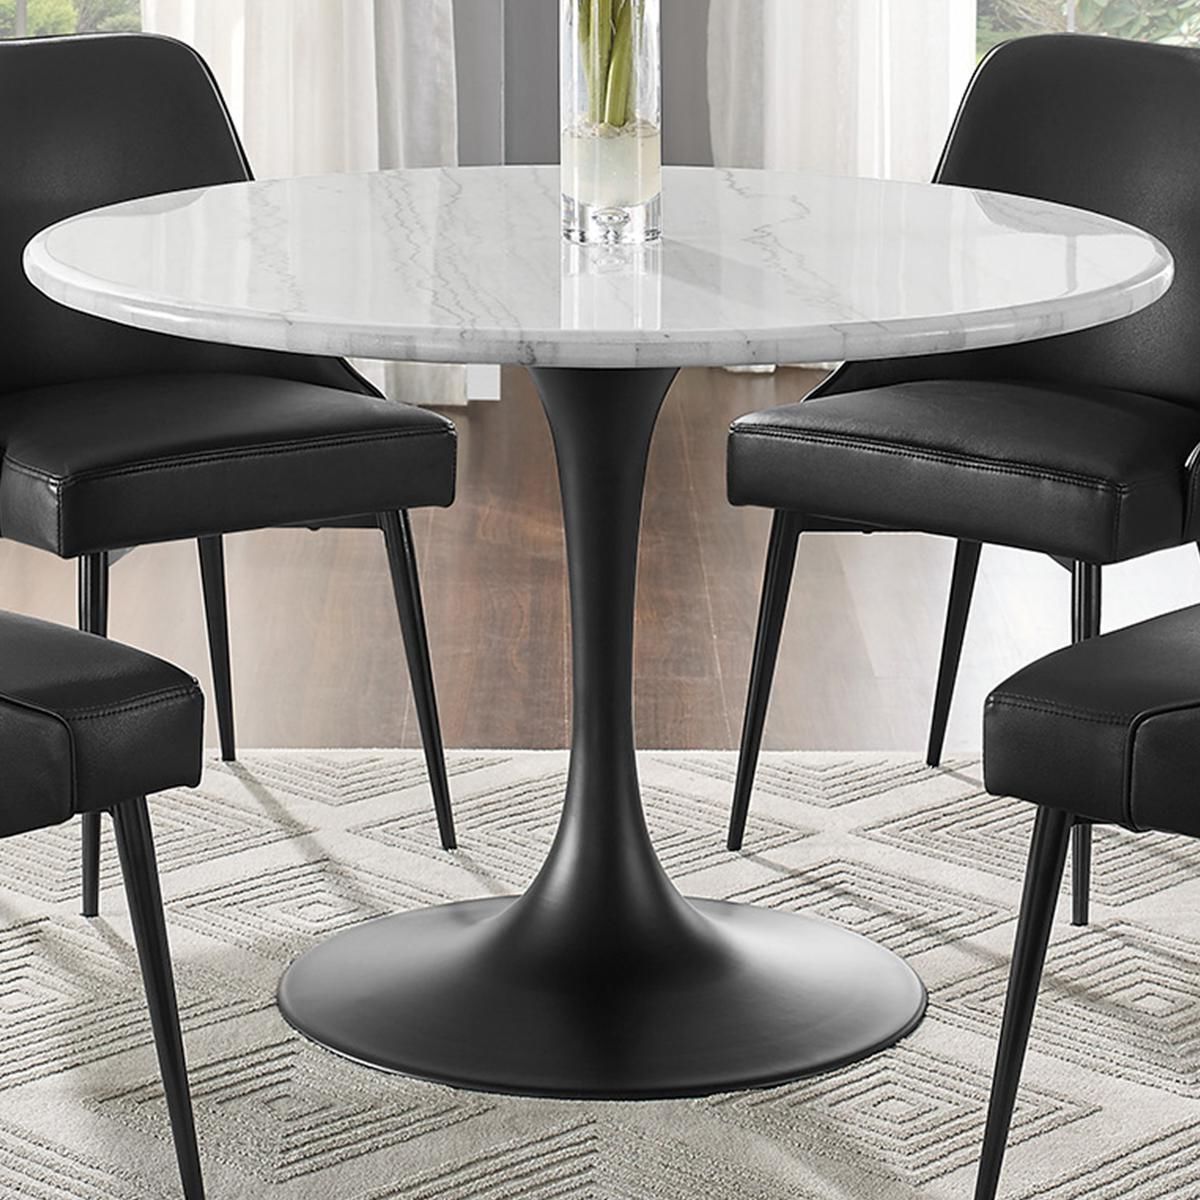 Crystal City Colfax Round Dining Table In Black And White Throughout Most Recent Chapman Marble Oval Dining Tables (View 7 of 25)